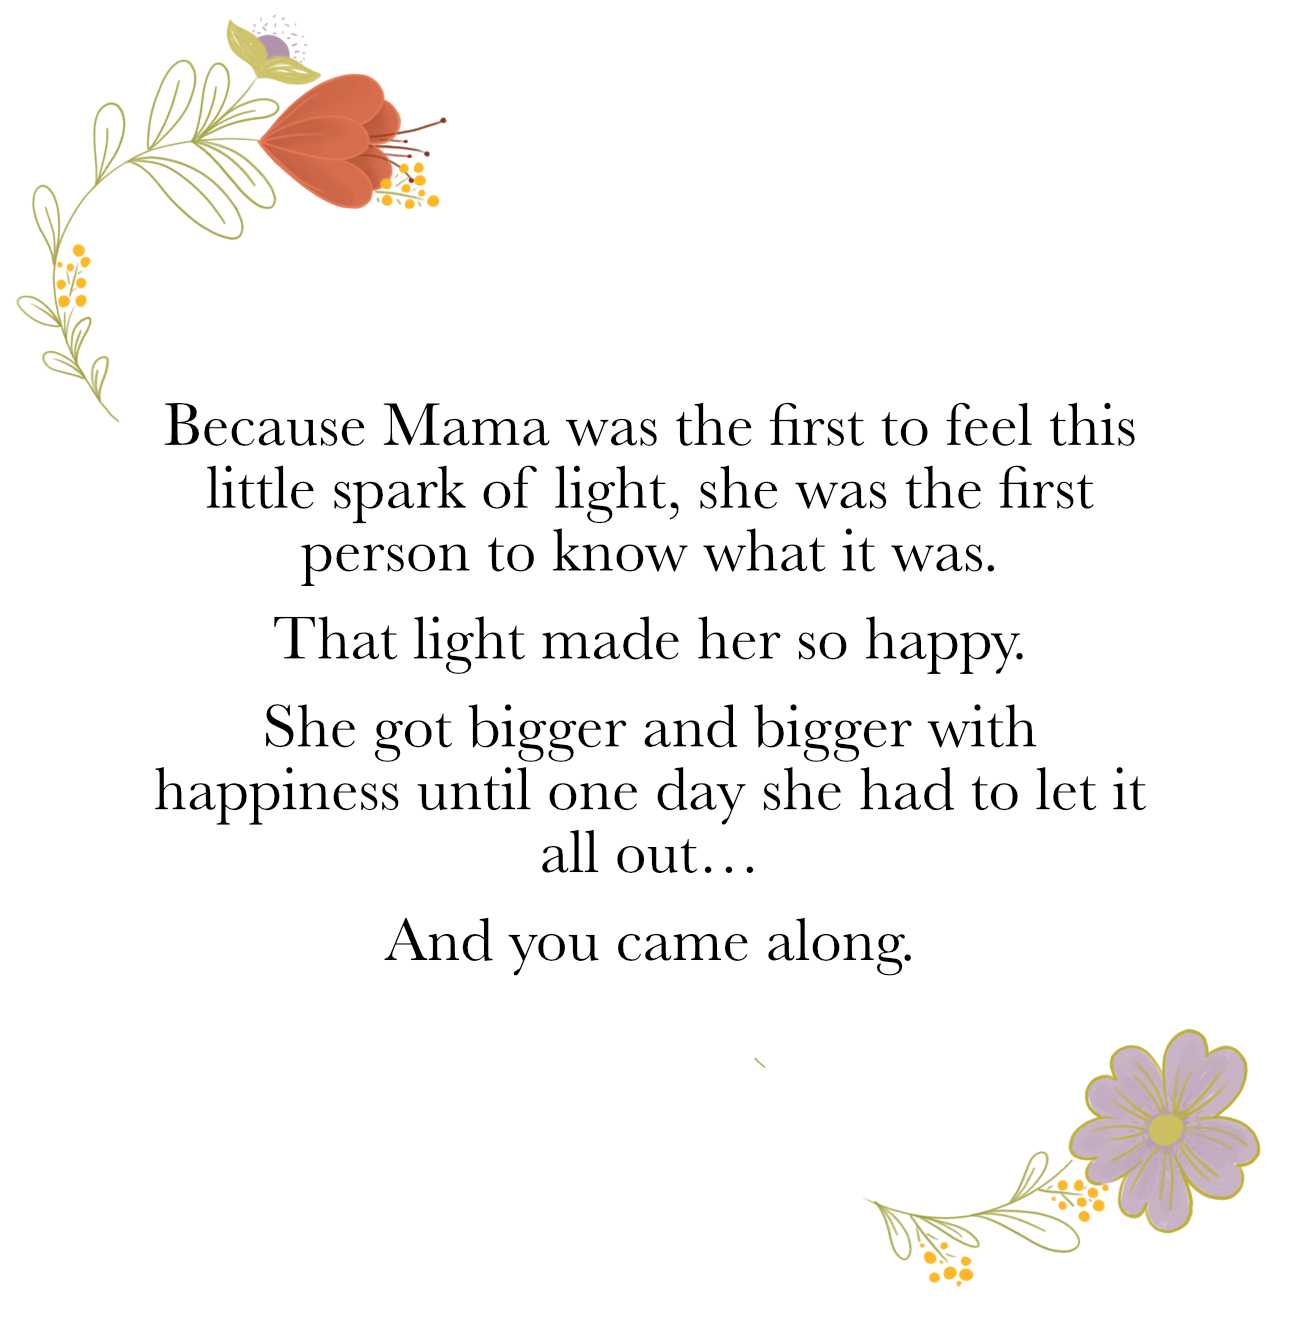 Bedtime stories Your Magic Light by Jade Maitre short stories for kids page 5